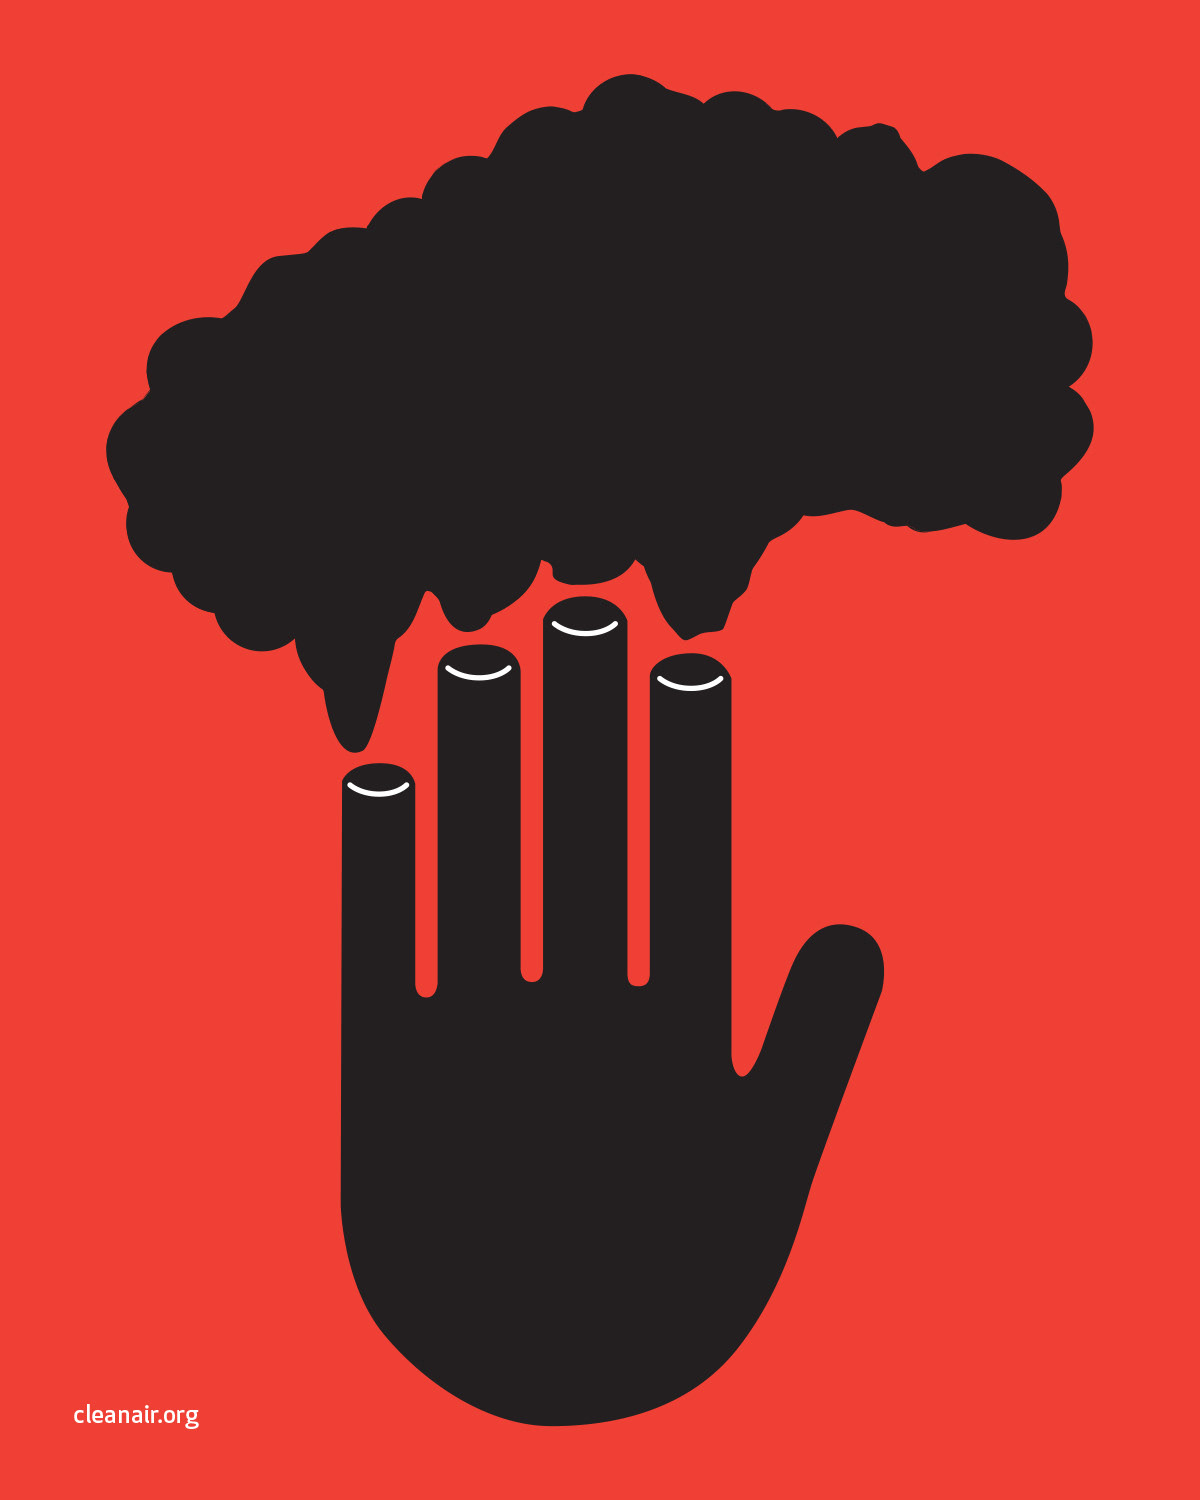 clean air poster forced connection smoke stack cloud